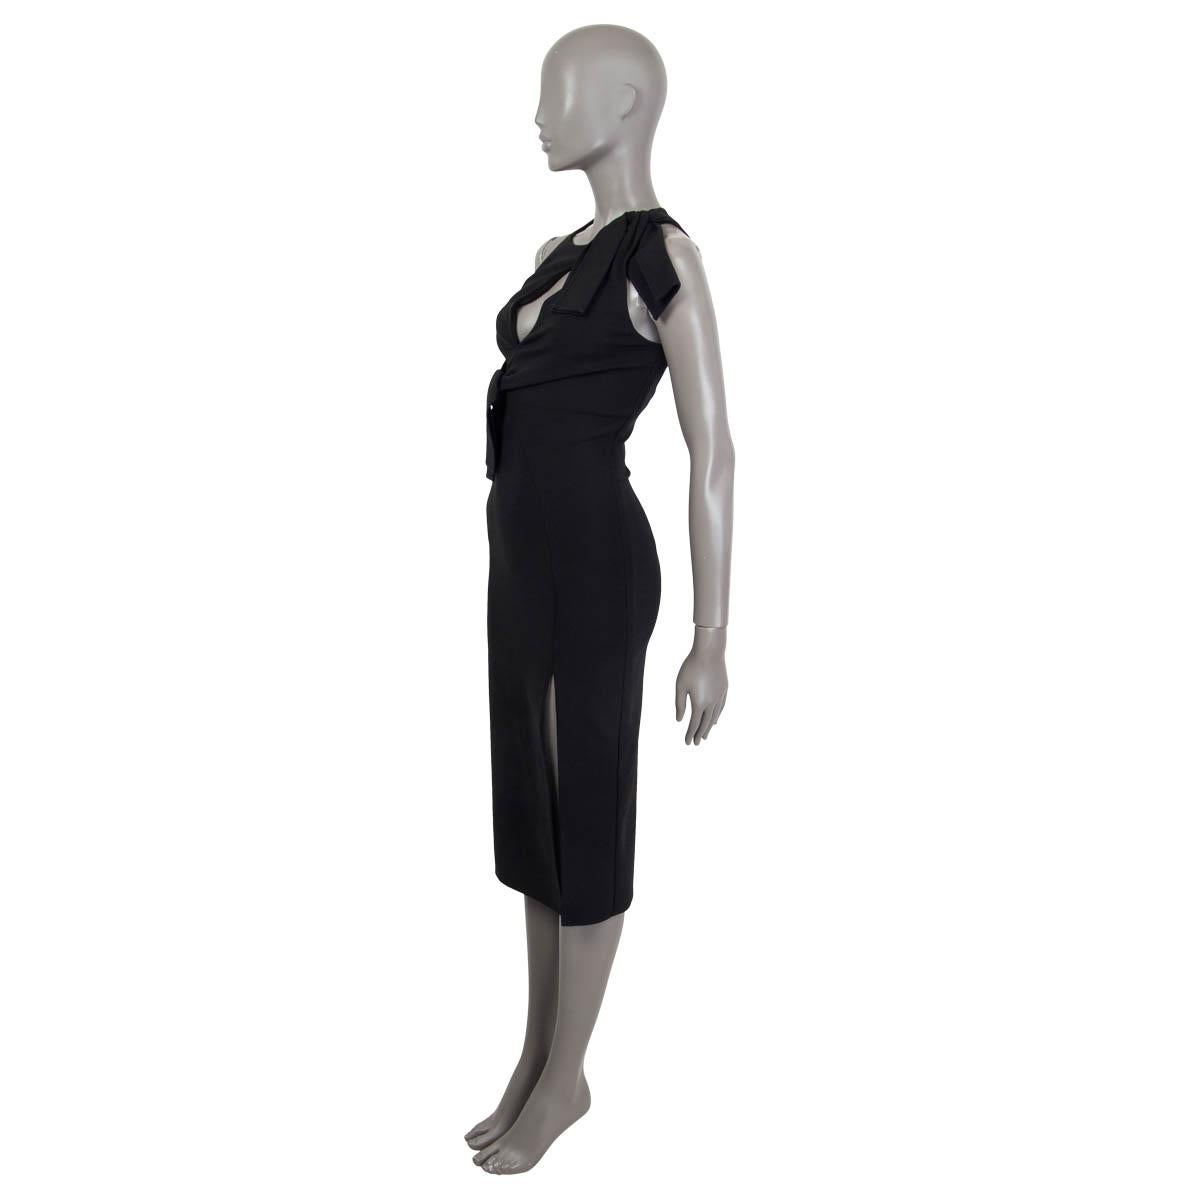 100% authentic Versace sleeveless dress in black viscose (78%), nylon (16%) and elastane (6%). Features cut out details, a slit on the front and two bows on the front. Opens with a concealed zipper and a hook at the back. Lined in black viscose